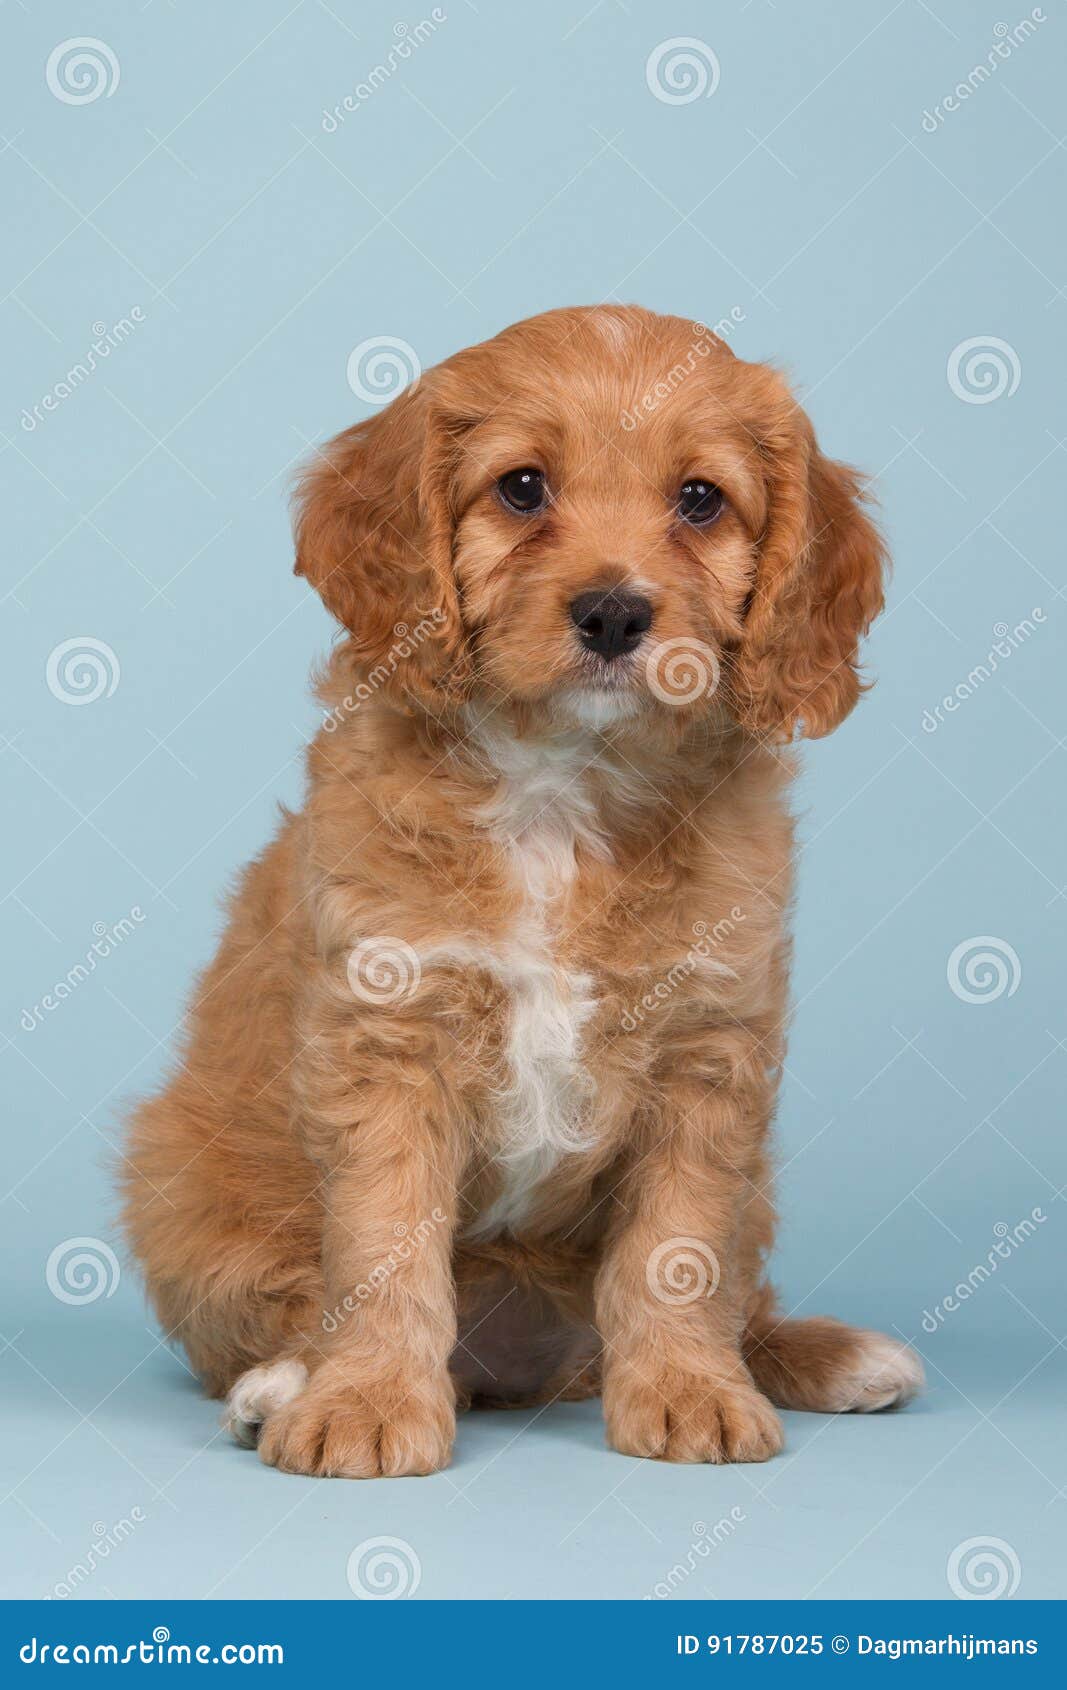 90 Cavapoo Puppy Photos Free Royalty Free Stock Photos From Dreamstime